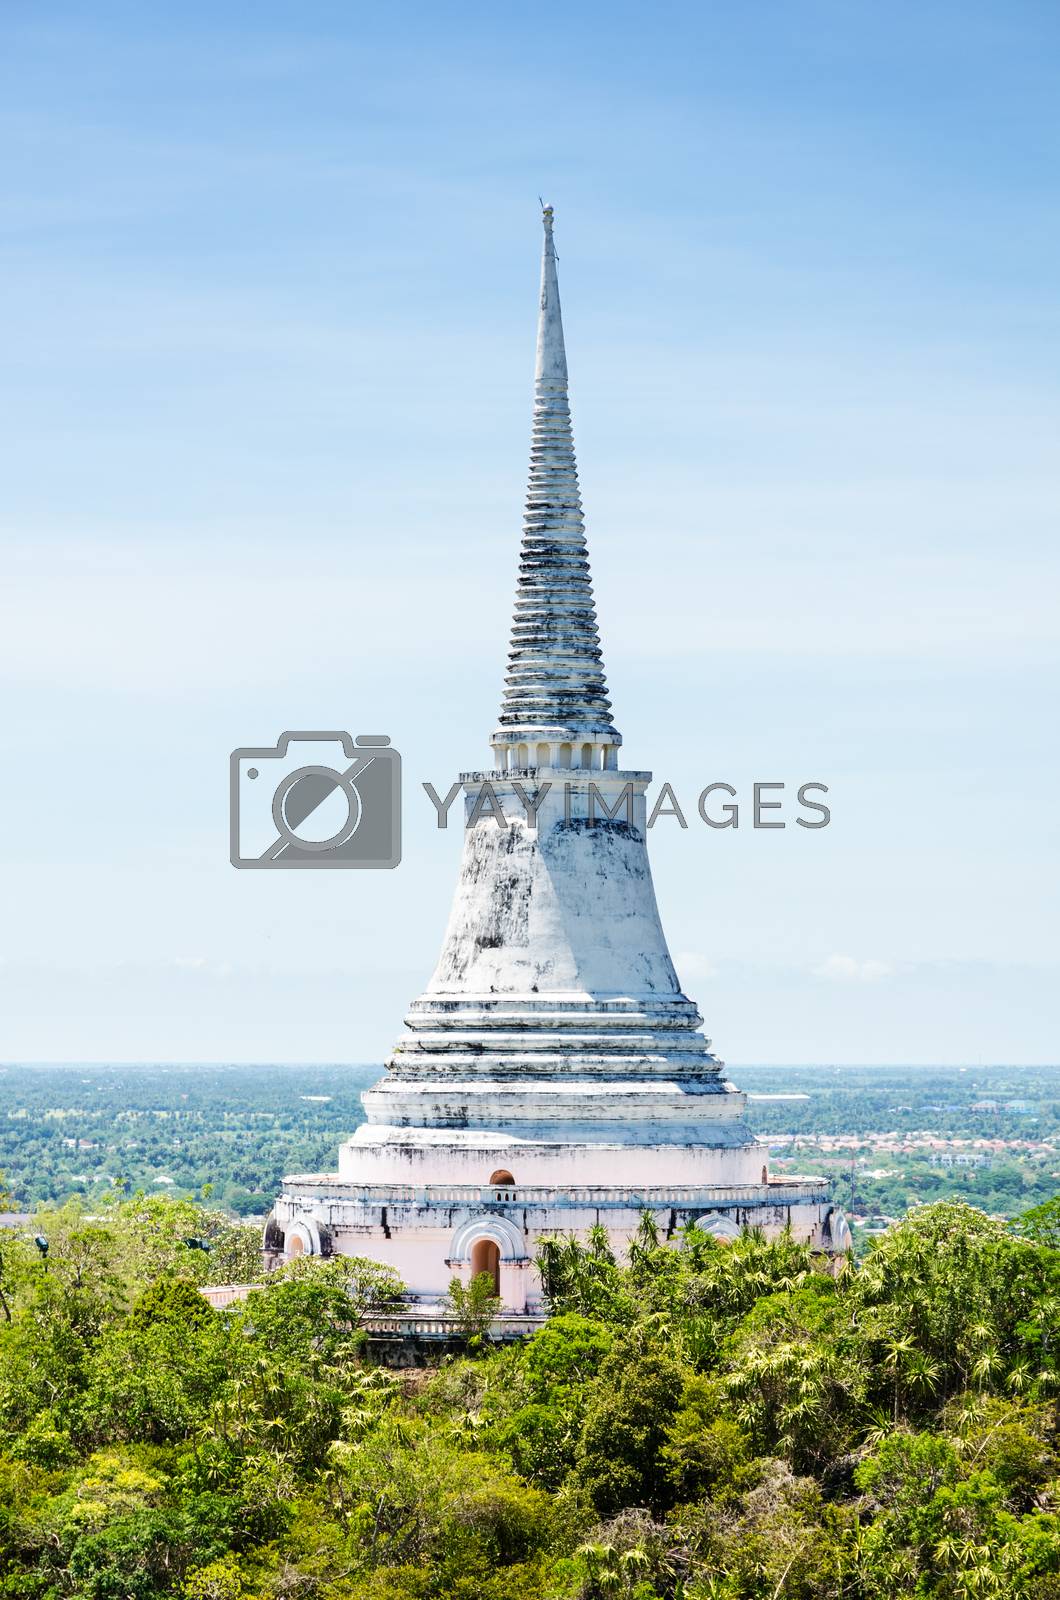 Royalty free image of Pagoda on mountain in Phra Nakhon Khiri temple by Yongkiet